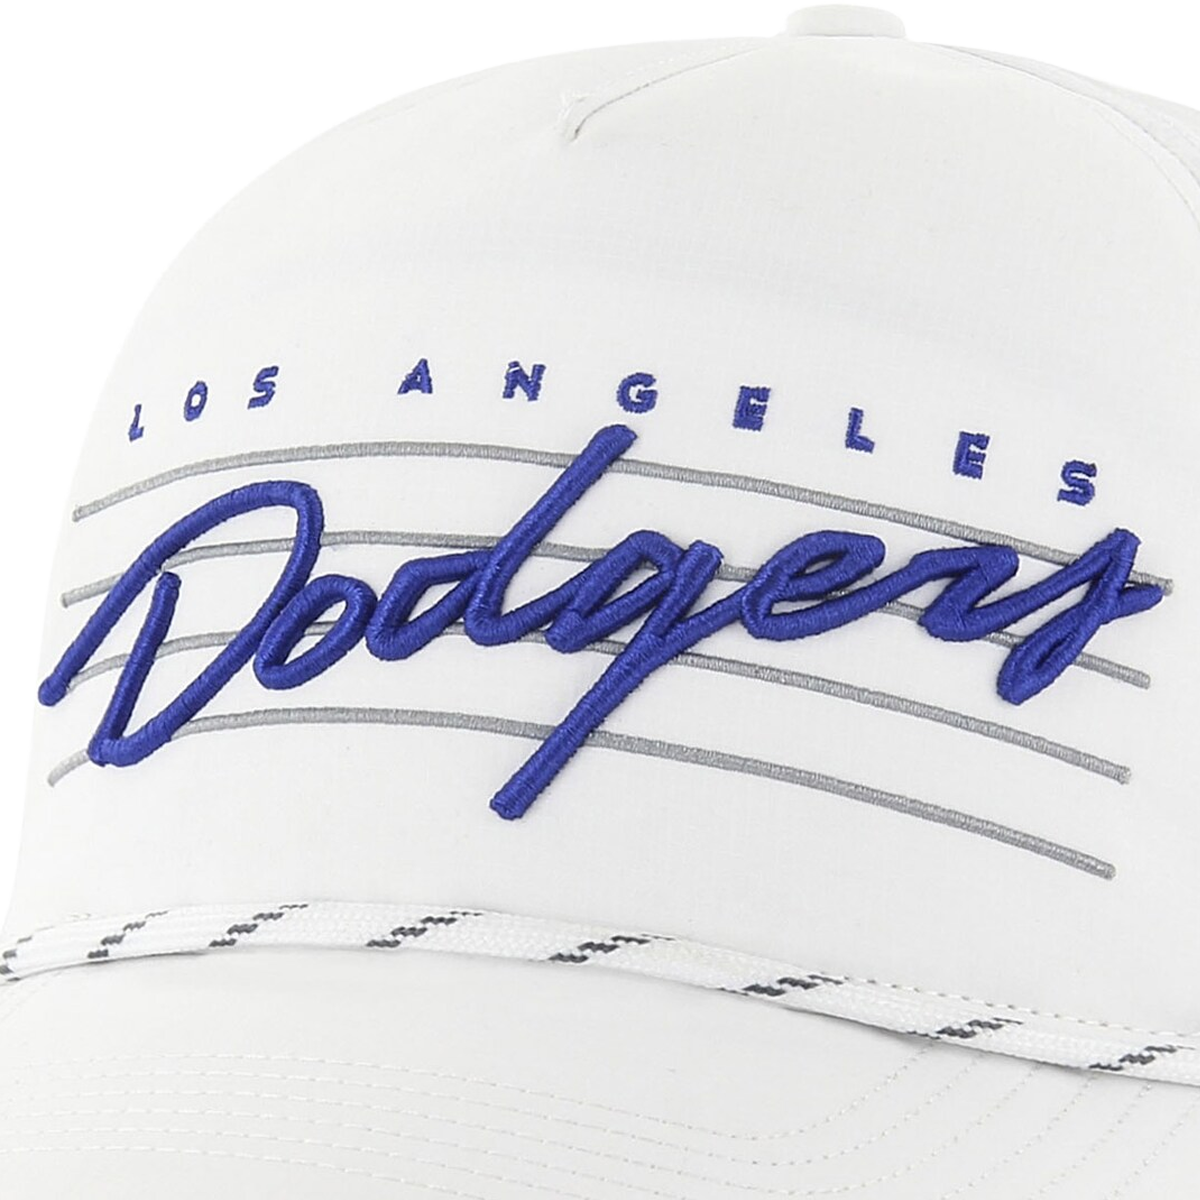 NWS Los Angeles Dodgers '47 Fitted Hat MLB Black 8